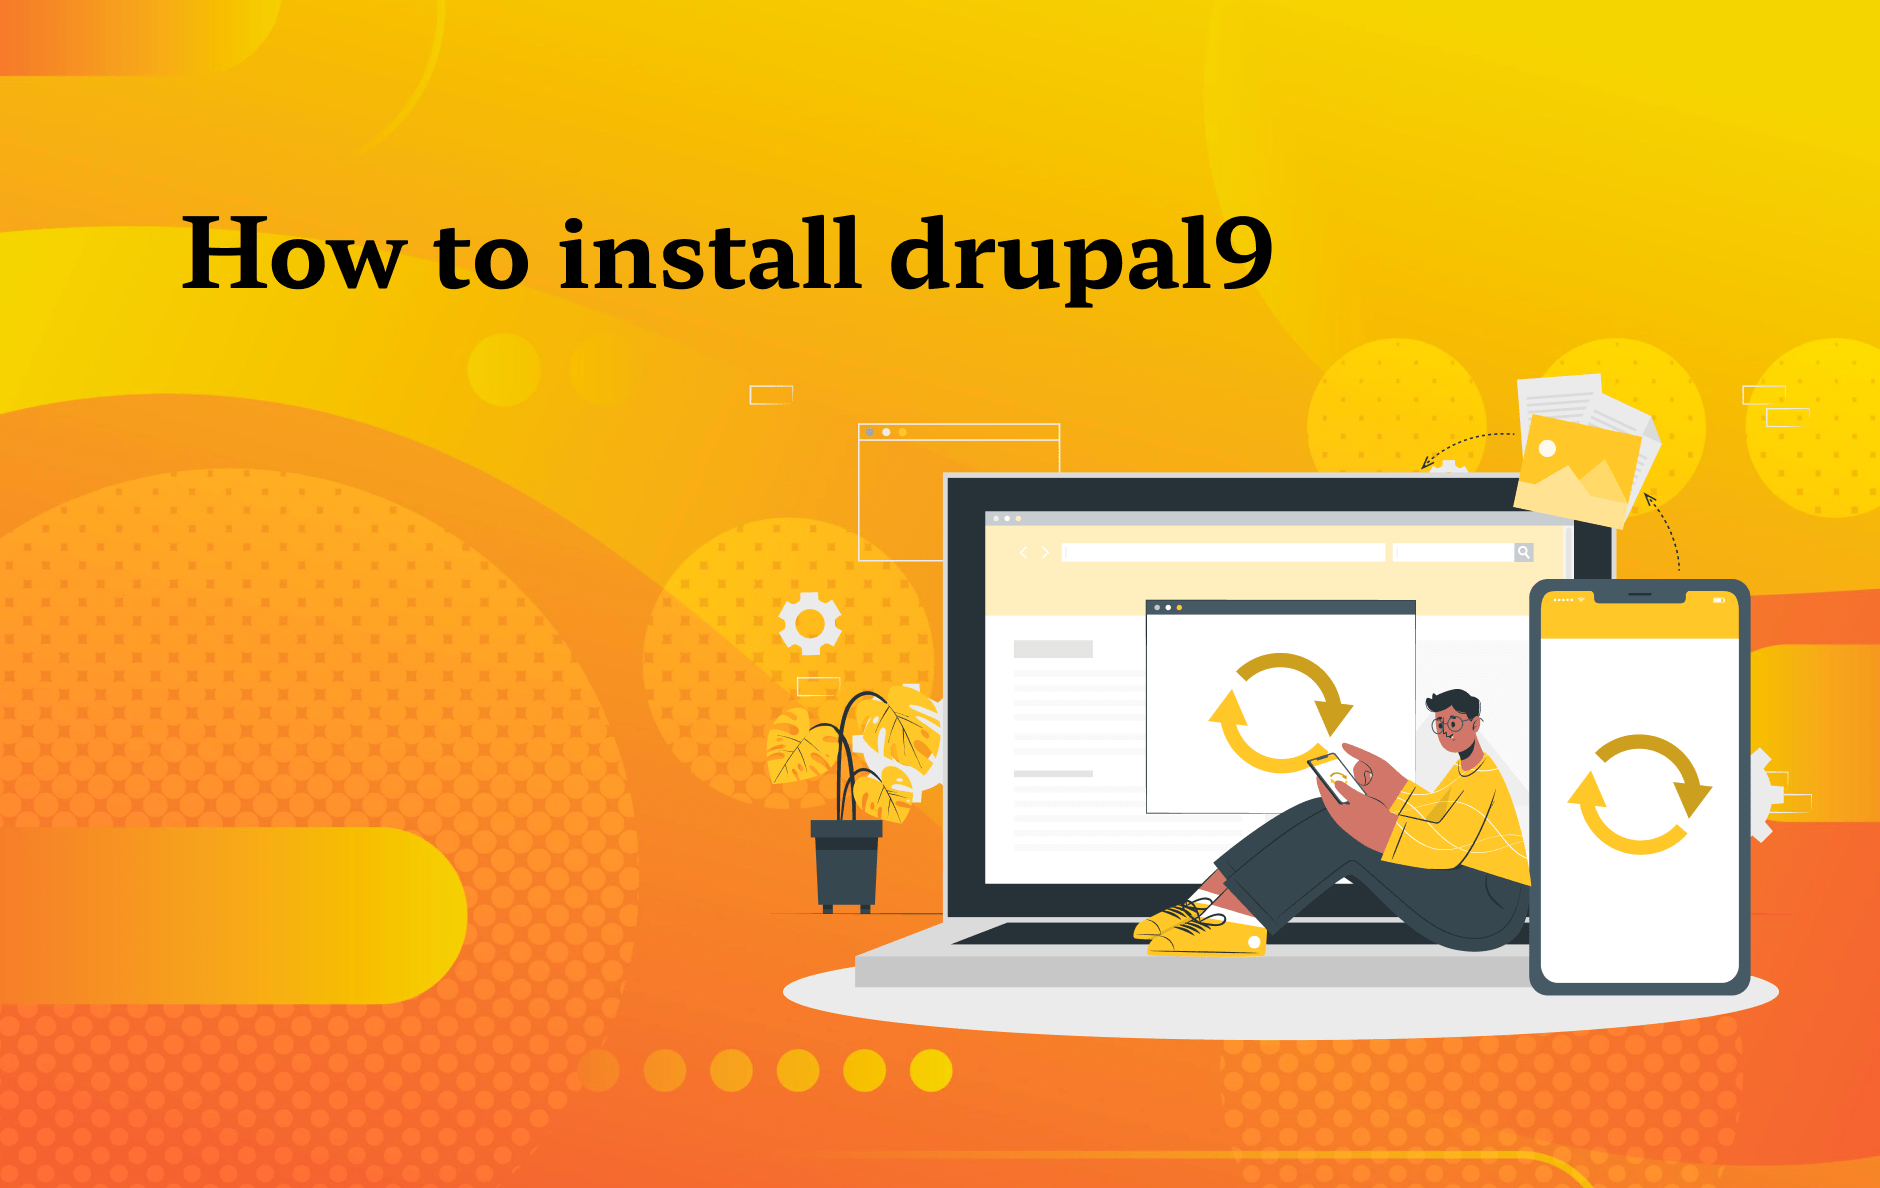 How to install drupal9 image